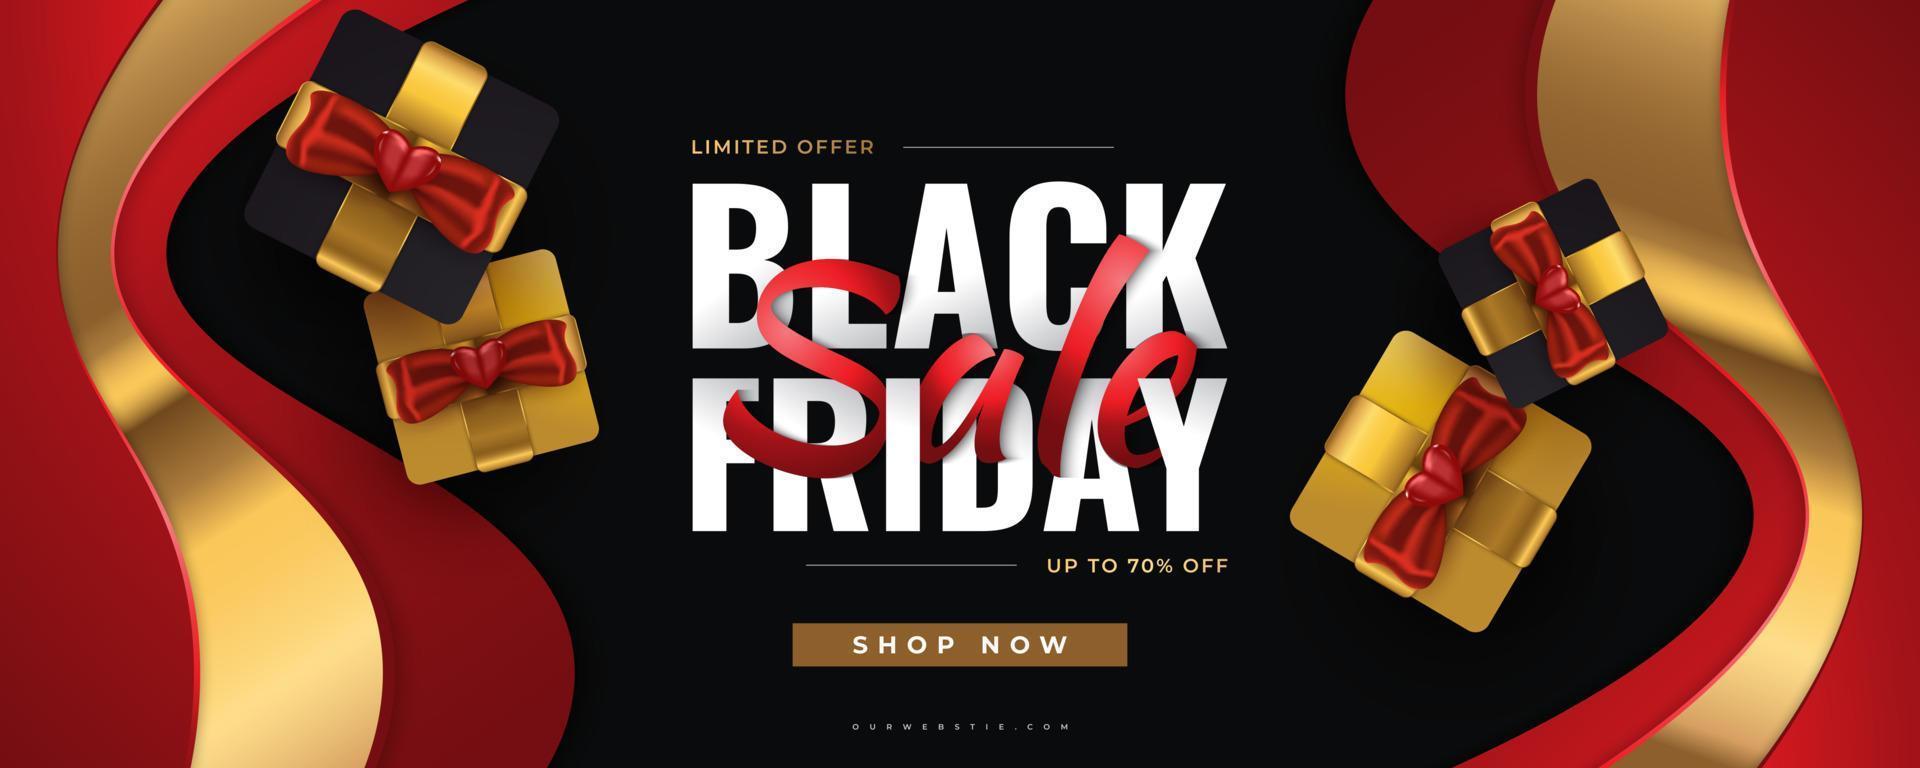 Black Friday Sale Banner with Realistic Black and Gold Gift Boxes on Wrap Paper Background. Advertising and Promotion Banner Template Design for Black Friday Campaign vector